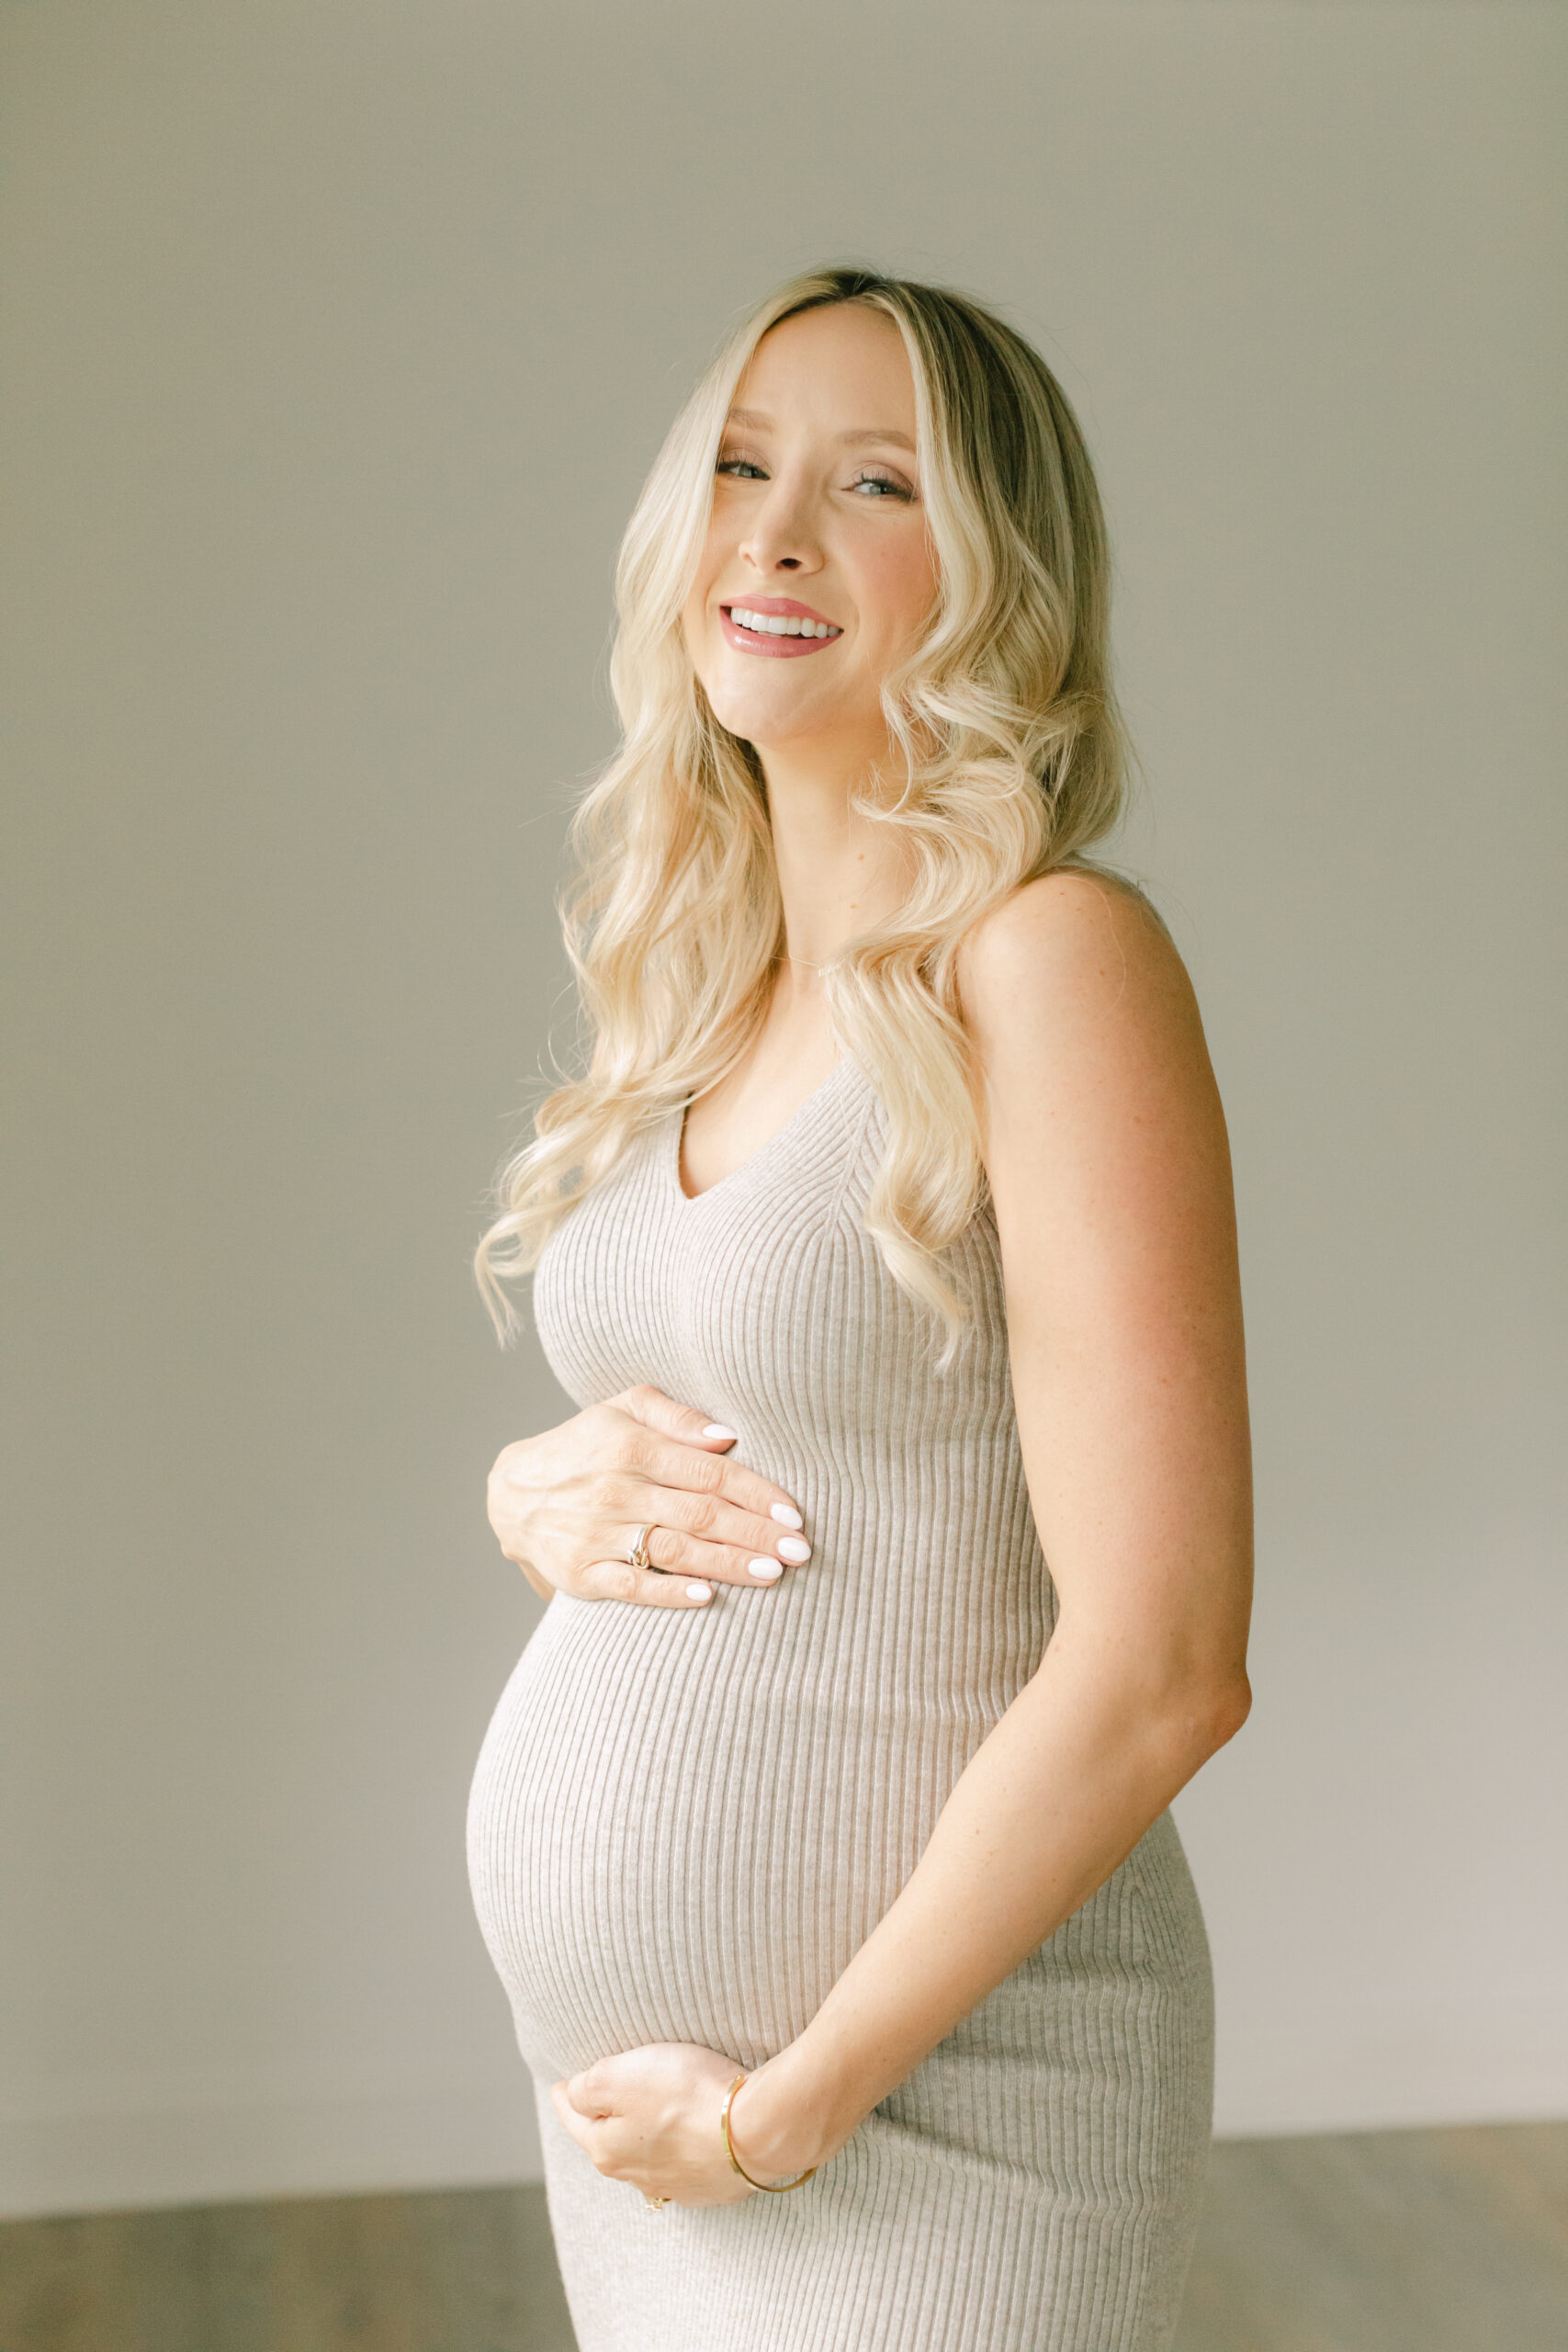 Maternity studio session in Nashville TN. Smiling mama to be